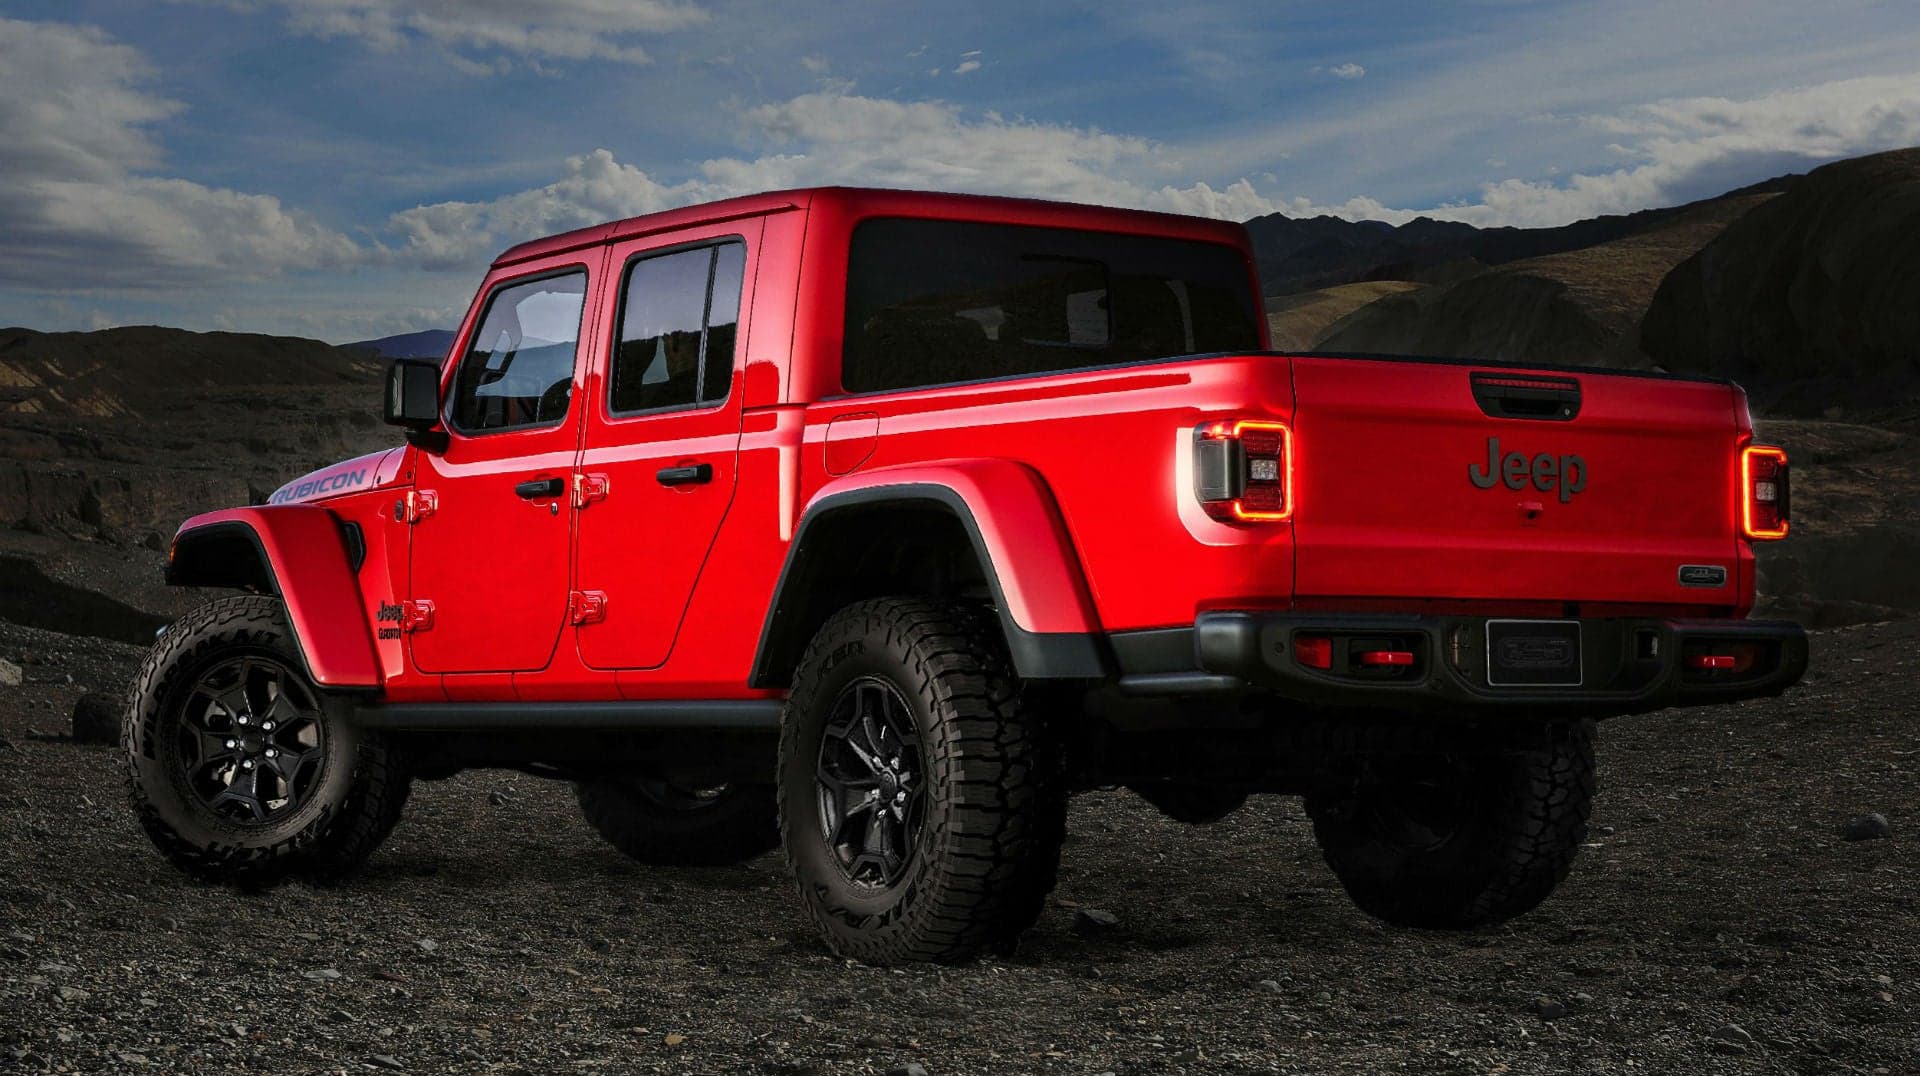 Every $62K 2020 Jeep Gladiator Launch Edition Sells in Just 24 Hours